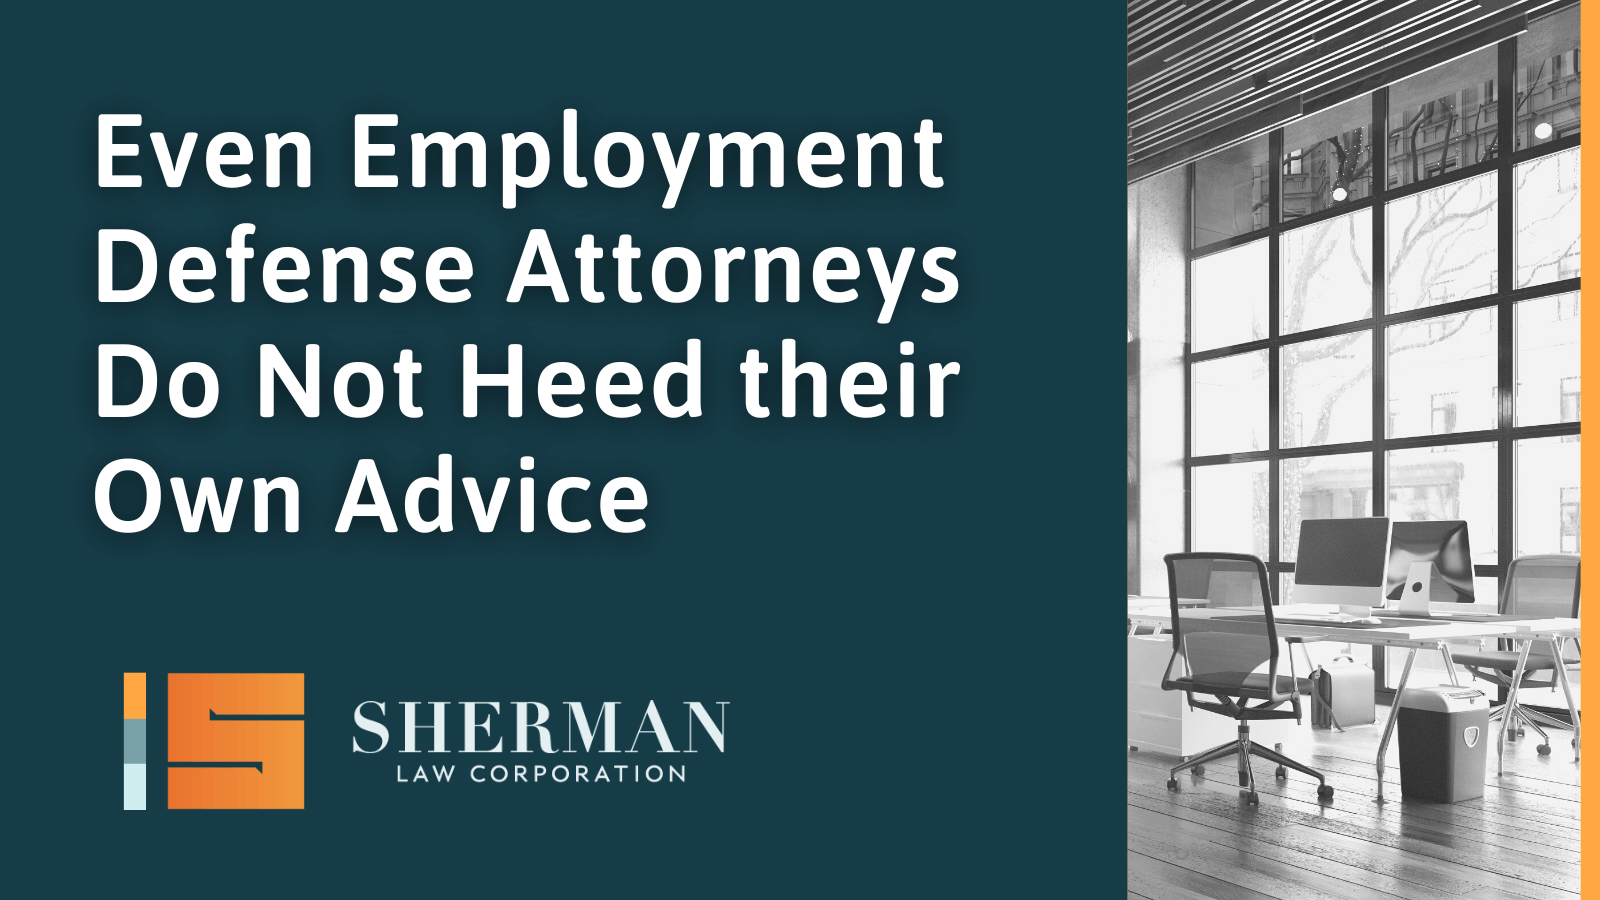 Even Employment Defense Attorneys Do Not Heed their Own Advice - callifornia employment law - sherman law corporation